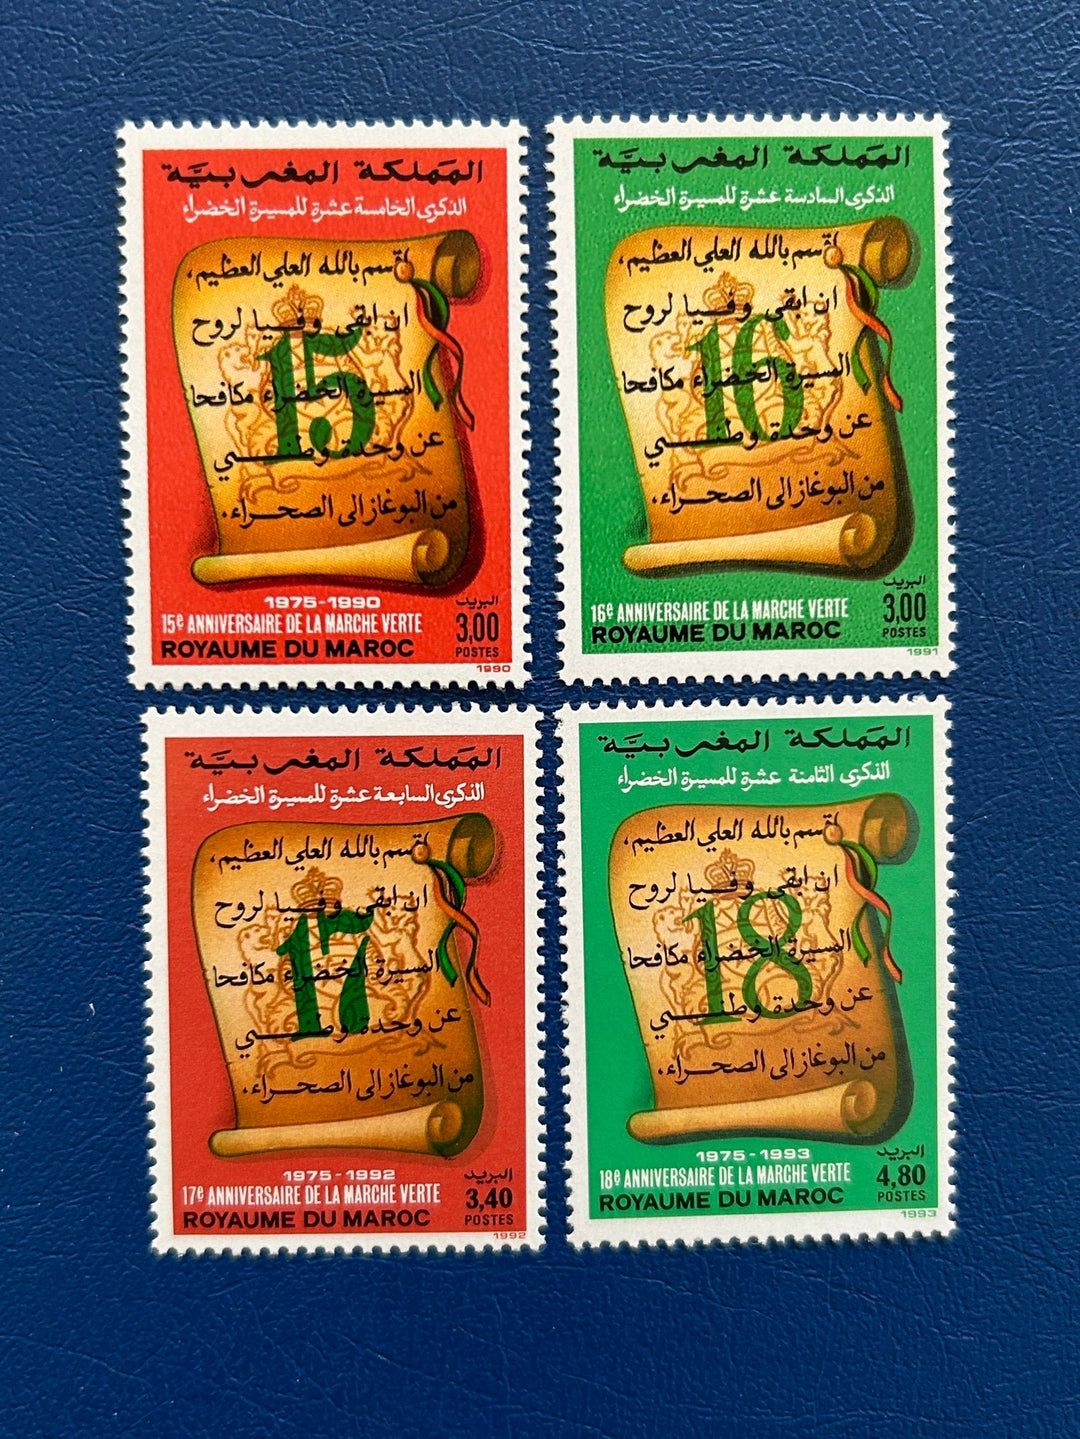 Morocco - Original Vintage Postage Stamps- 1990-93 - Green March - for the collector, artist or crafter